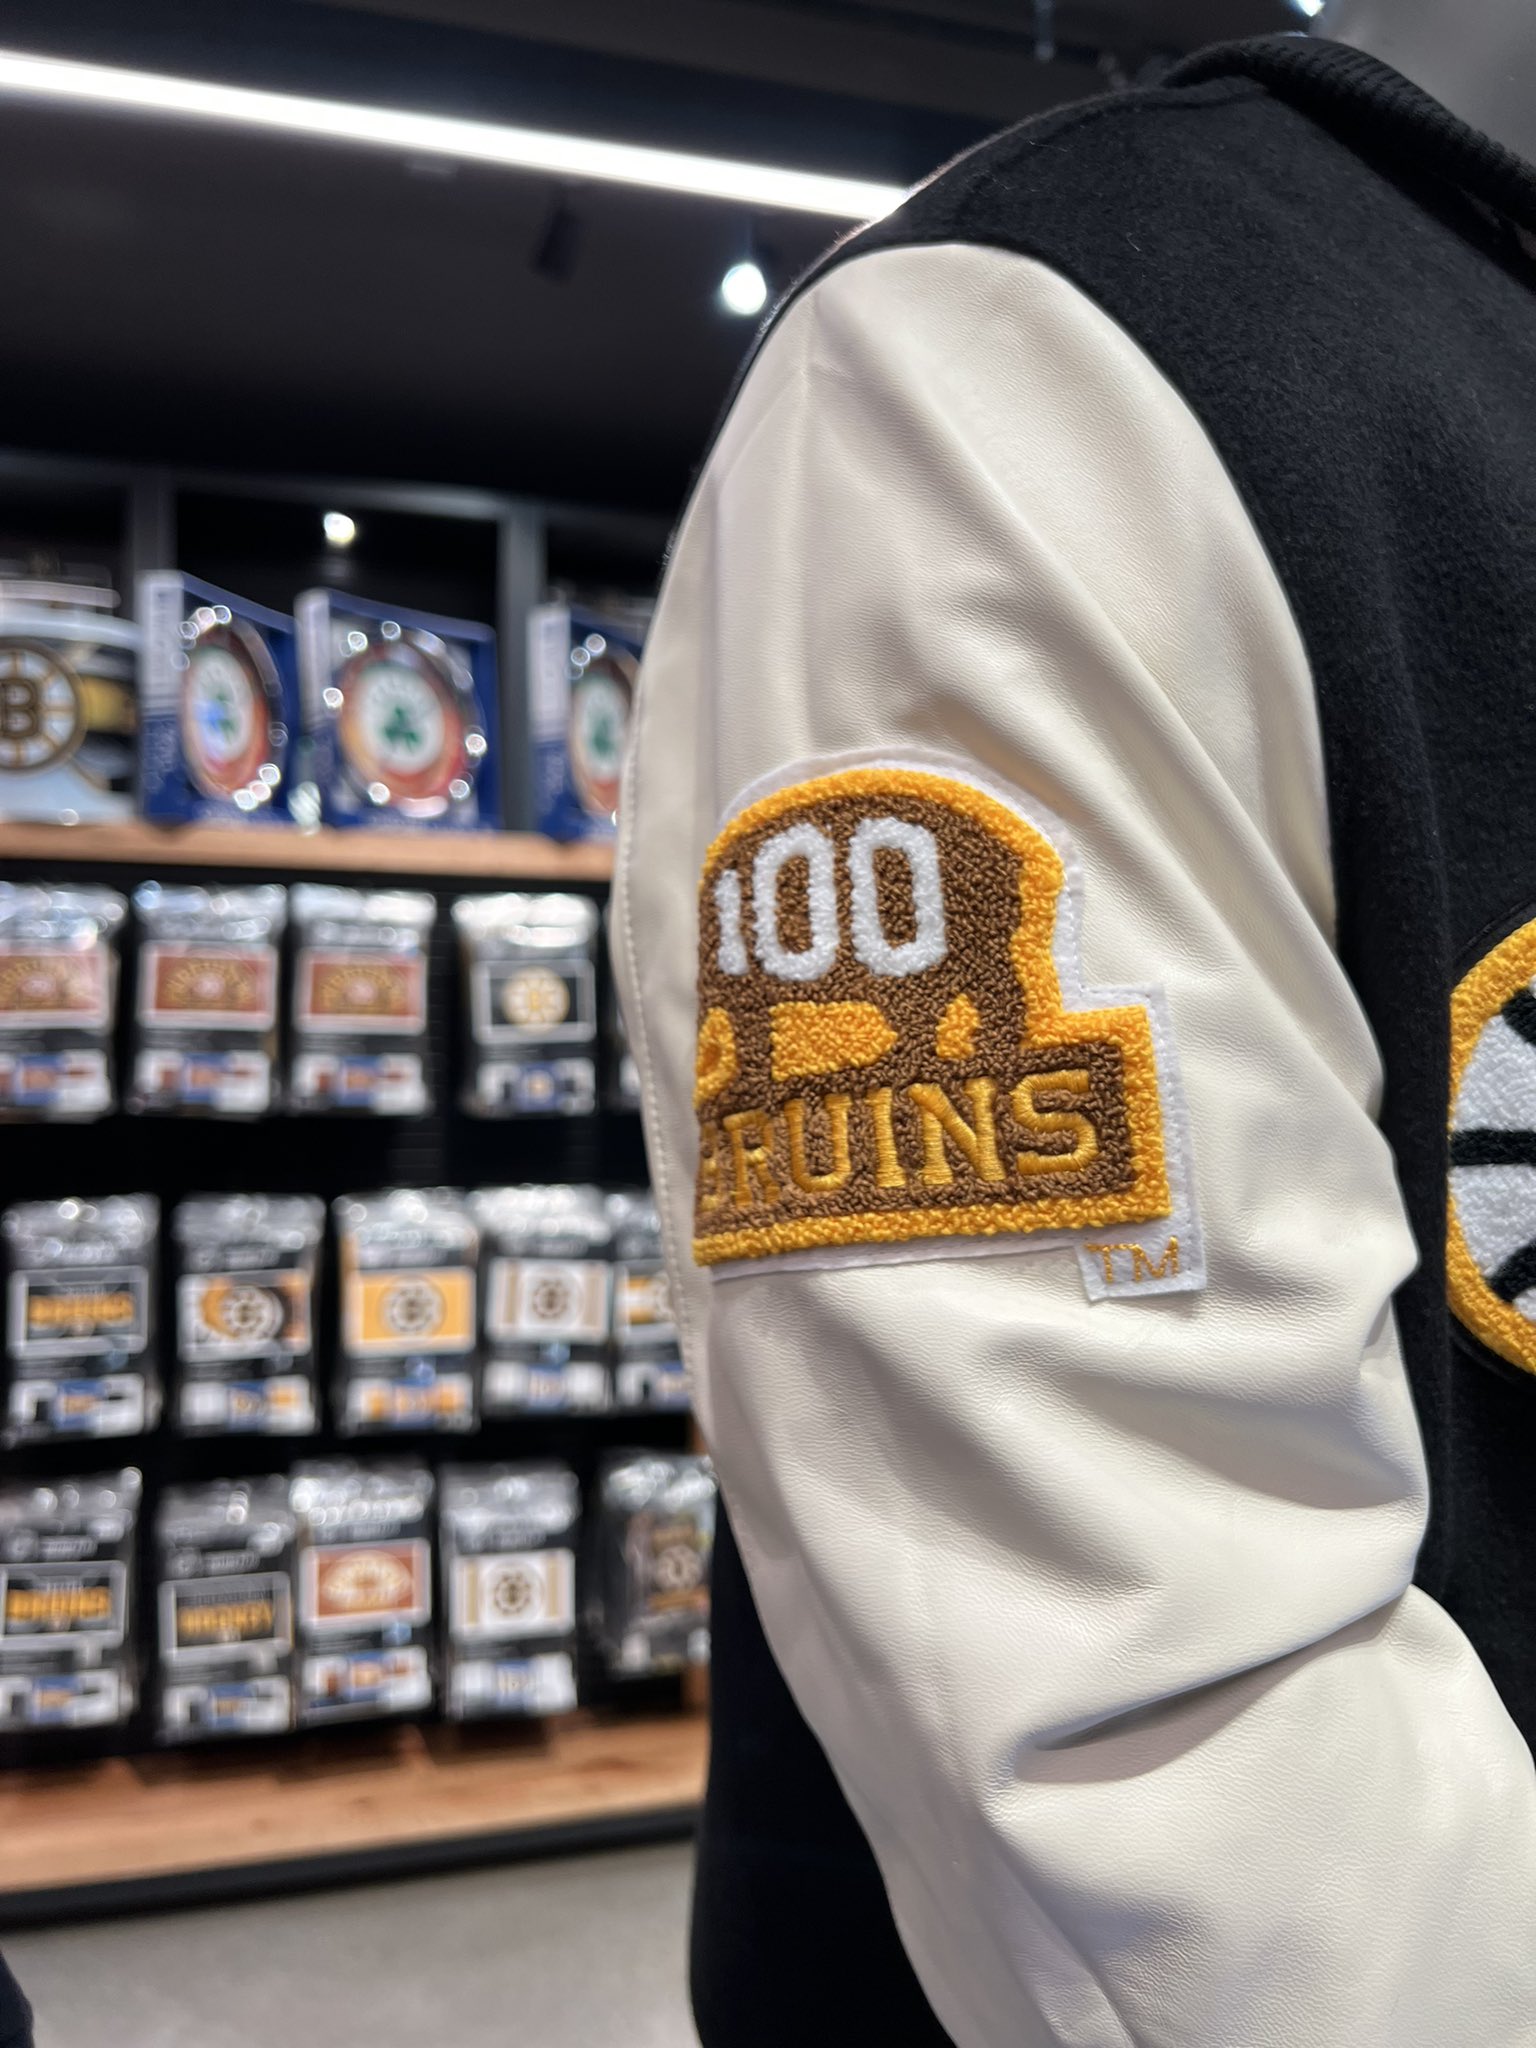 Boston Bruins Proshop - Downtown Boston - 12 tips from 1056 visitors